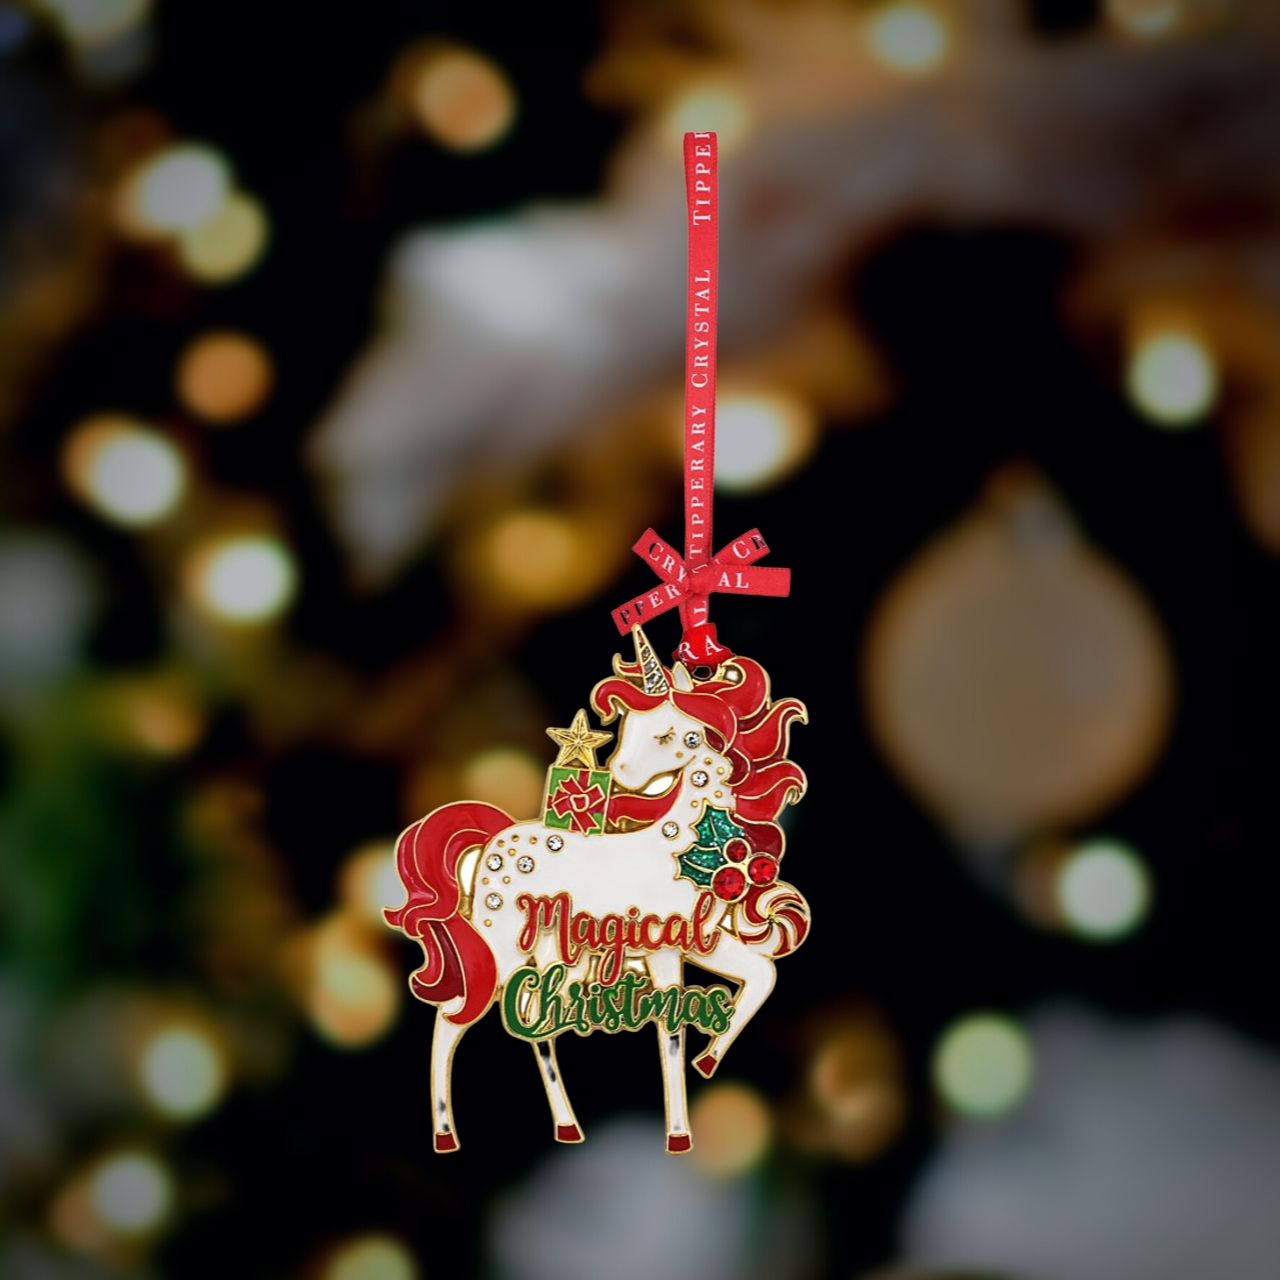 Sparkle Unicorn Christmas Decoration  We just Love Christmas! The festive season, the giving of gifts, creating memories and being together with family and loved ones. Have lots of fun with our lovingly designed and created Christmas decorations, each one has a magic sparkle of elf dust!